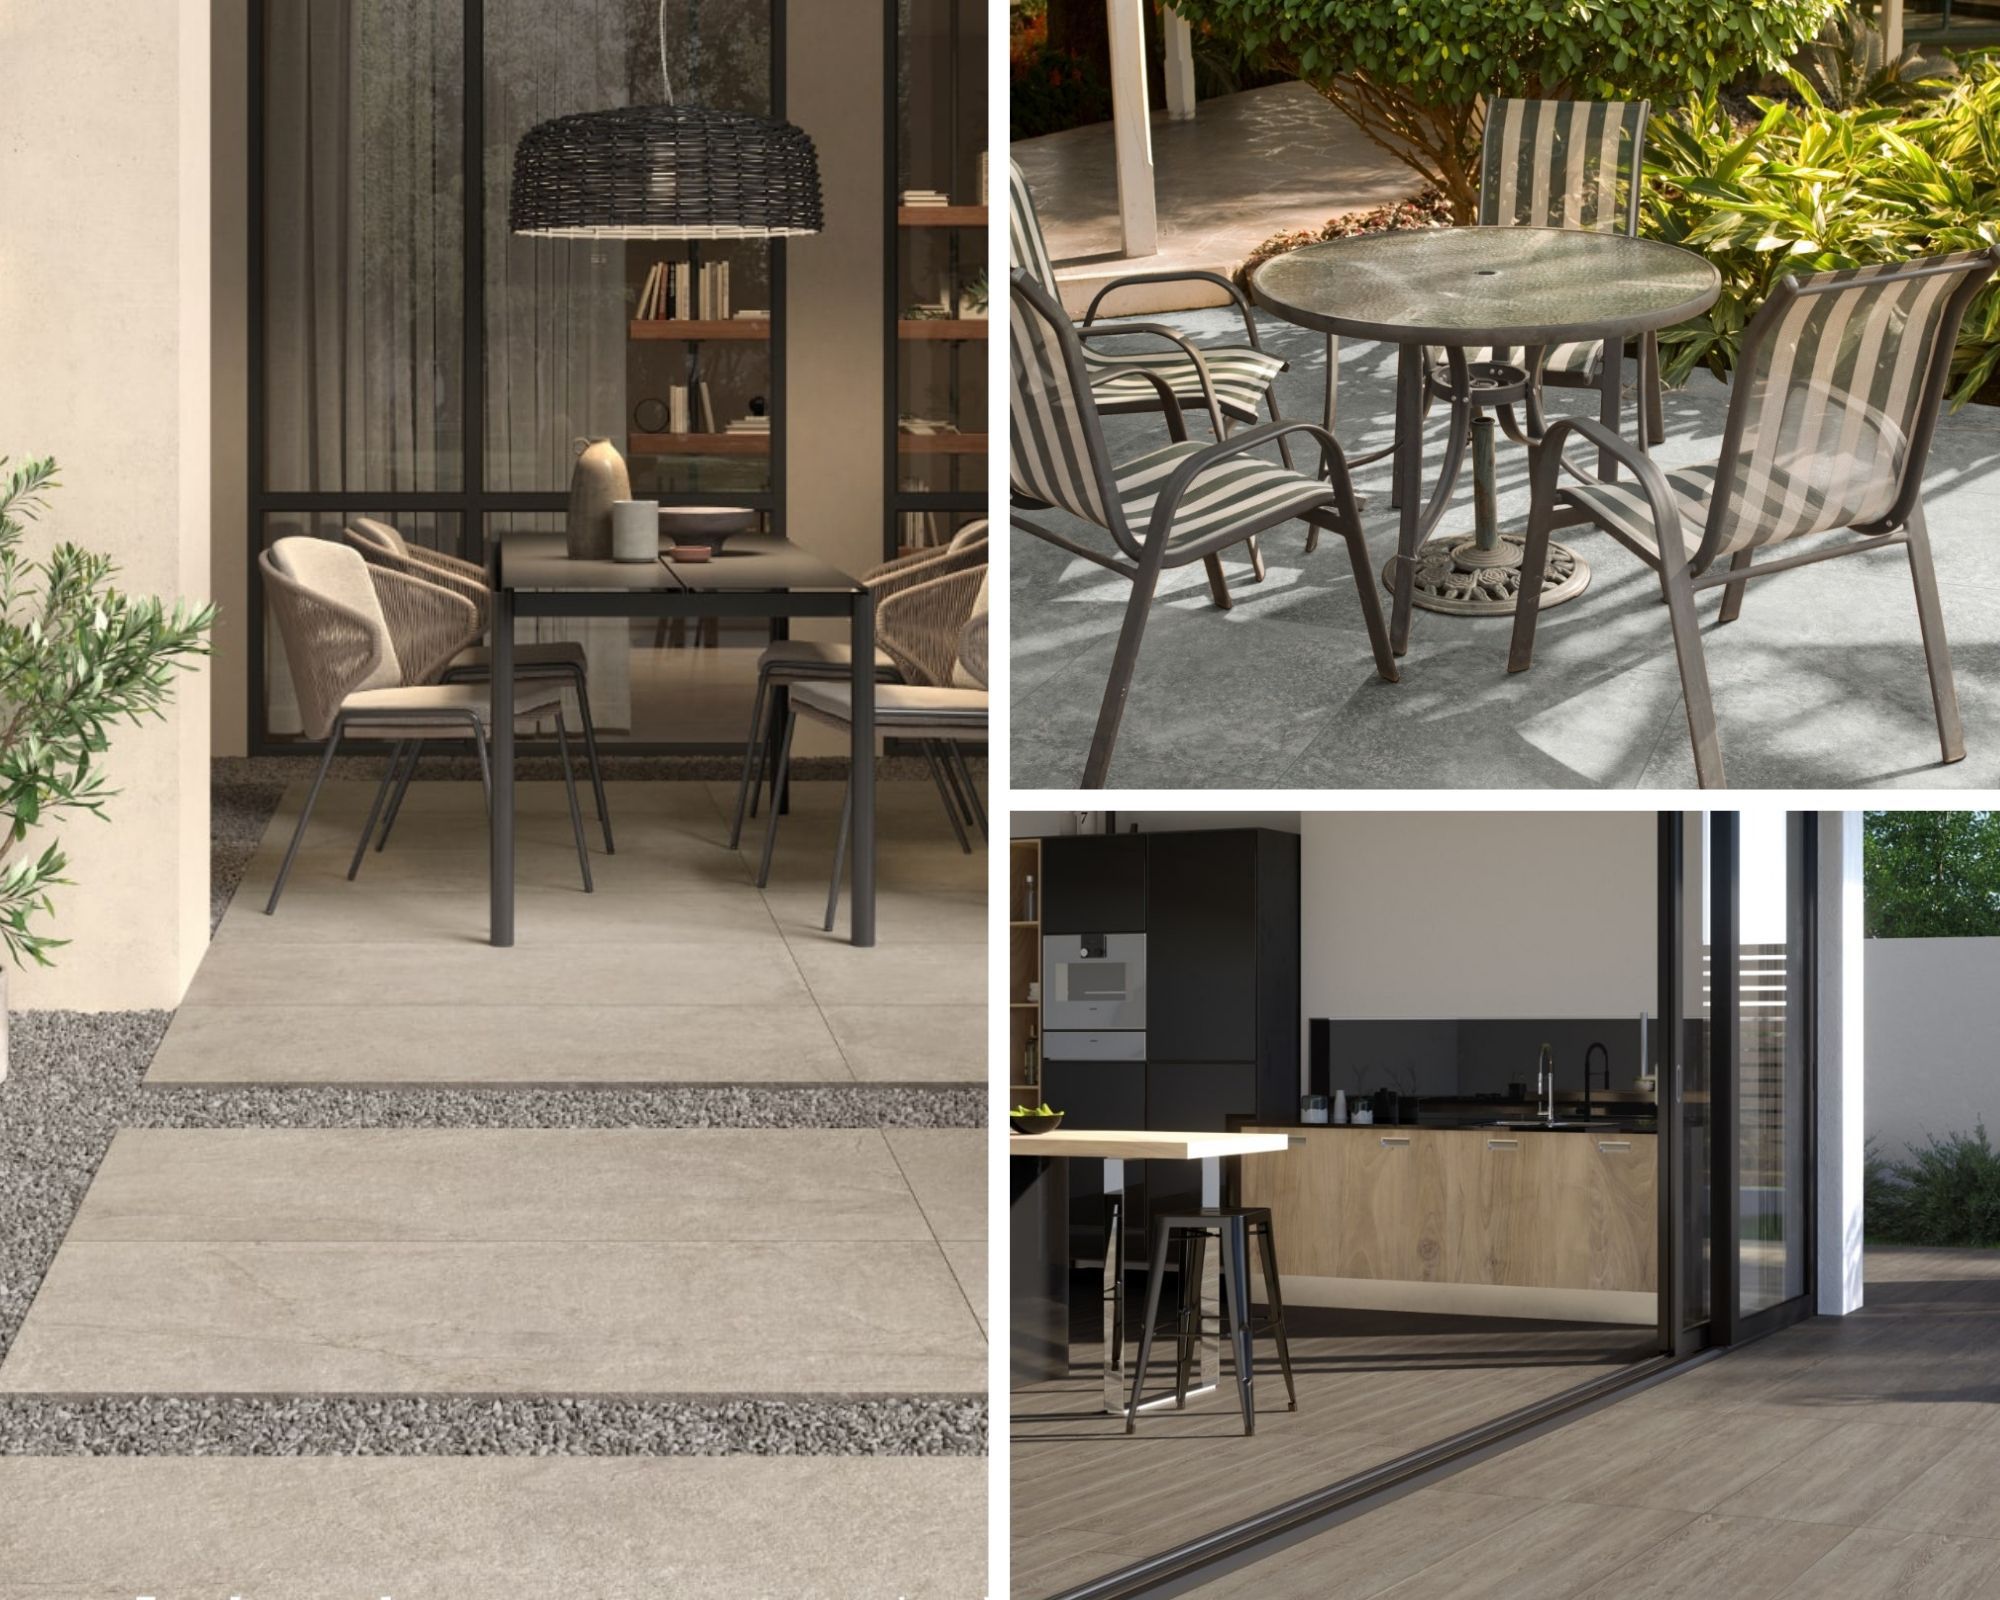 What You Need To Know About Outdoor Porcelain Tile